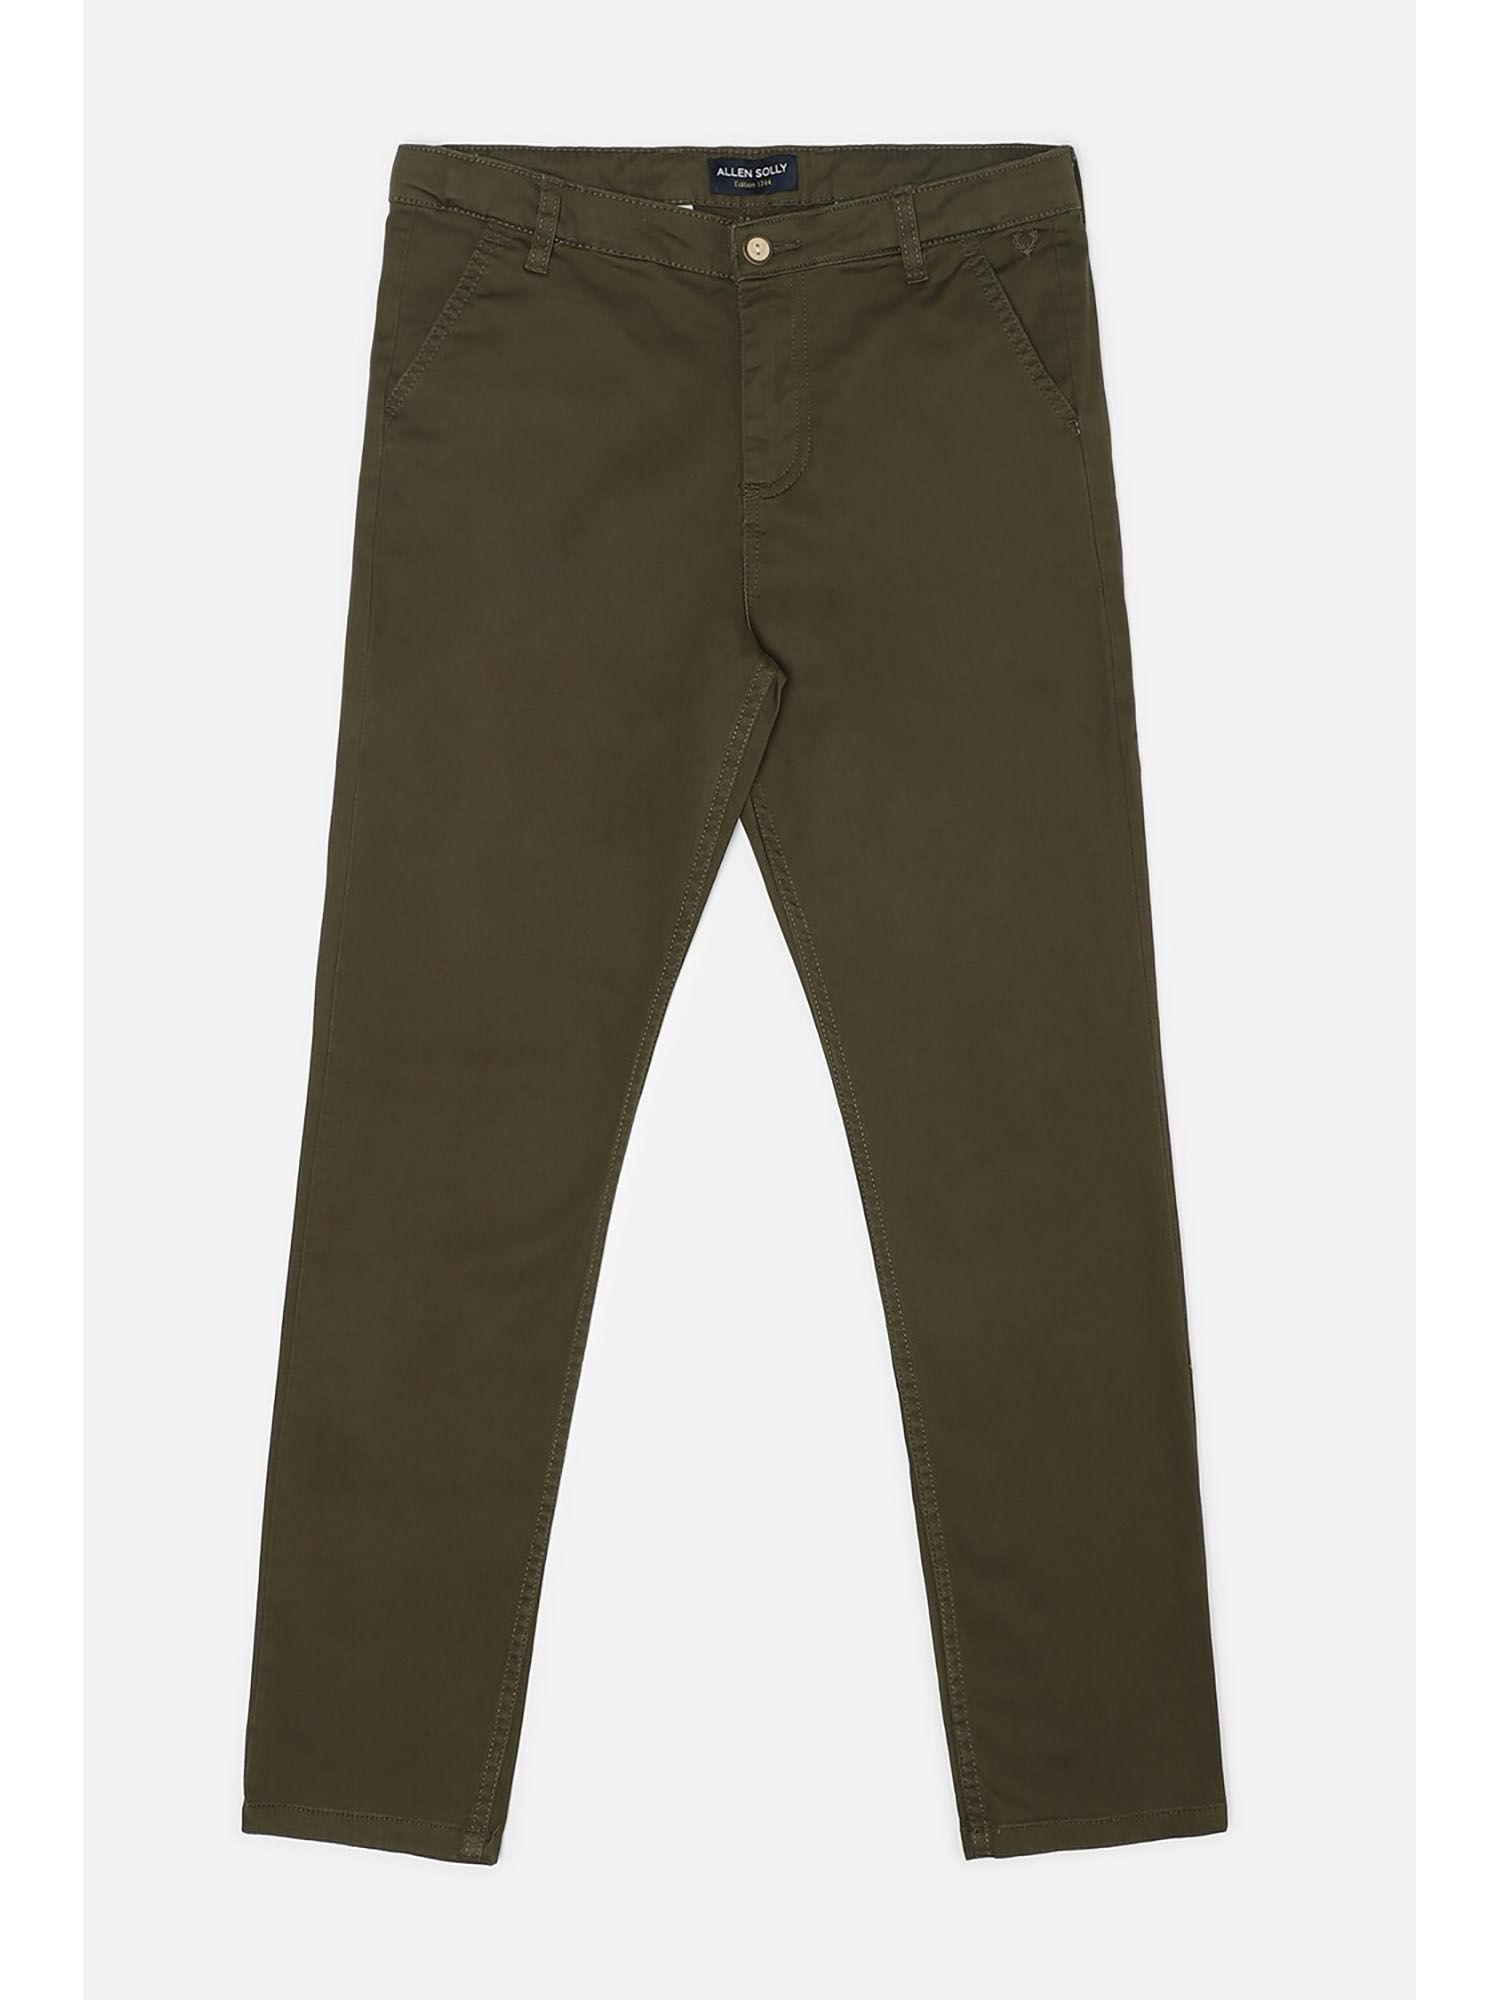 Boys Olive Cotton Solid Trousers